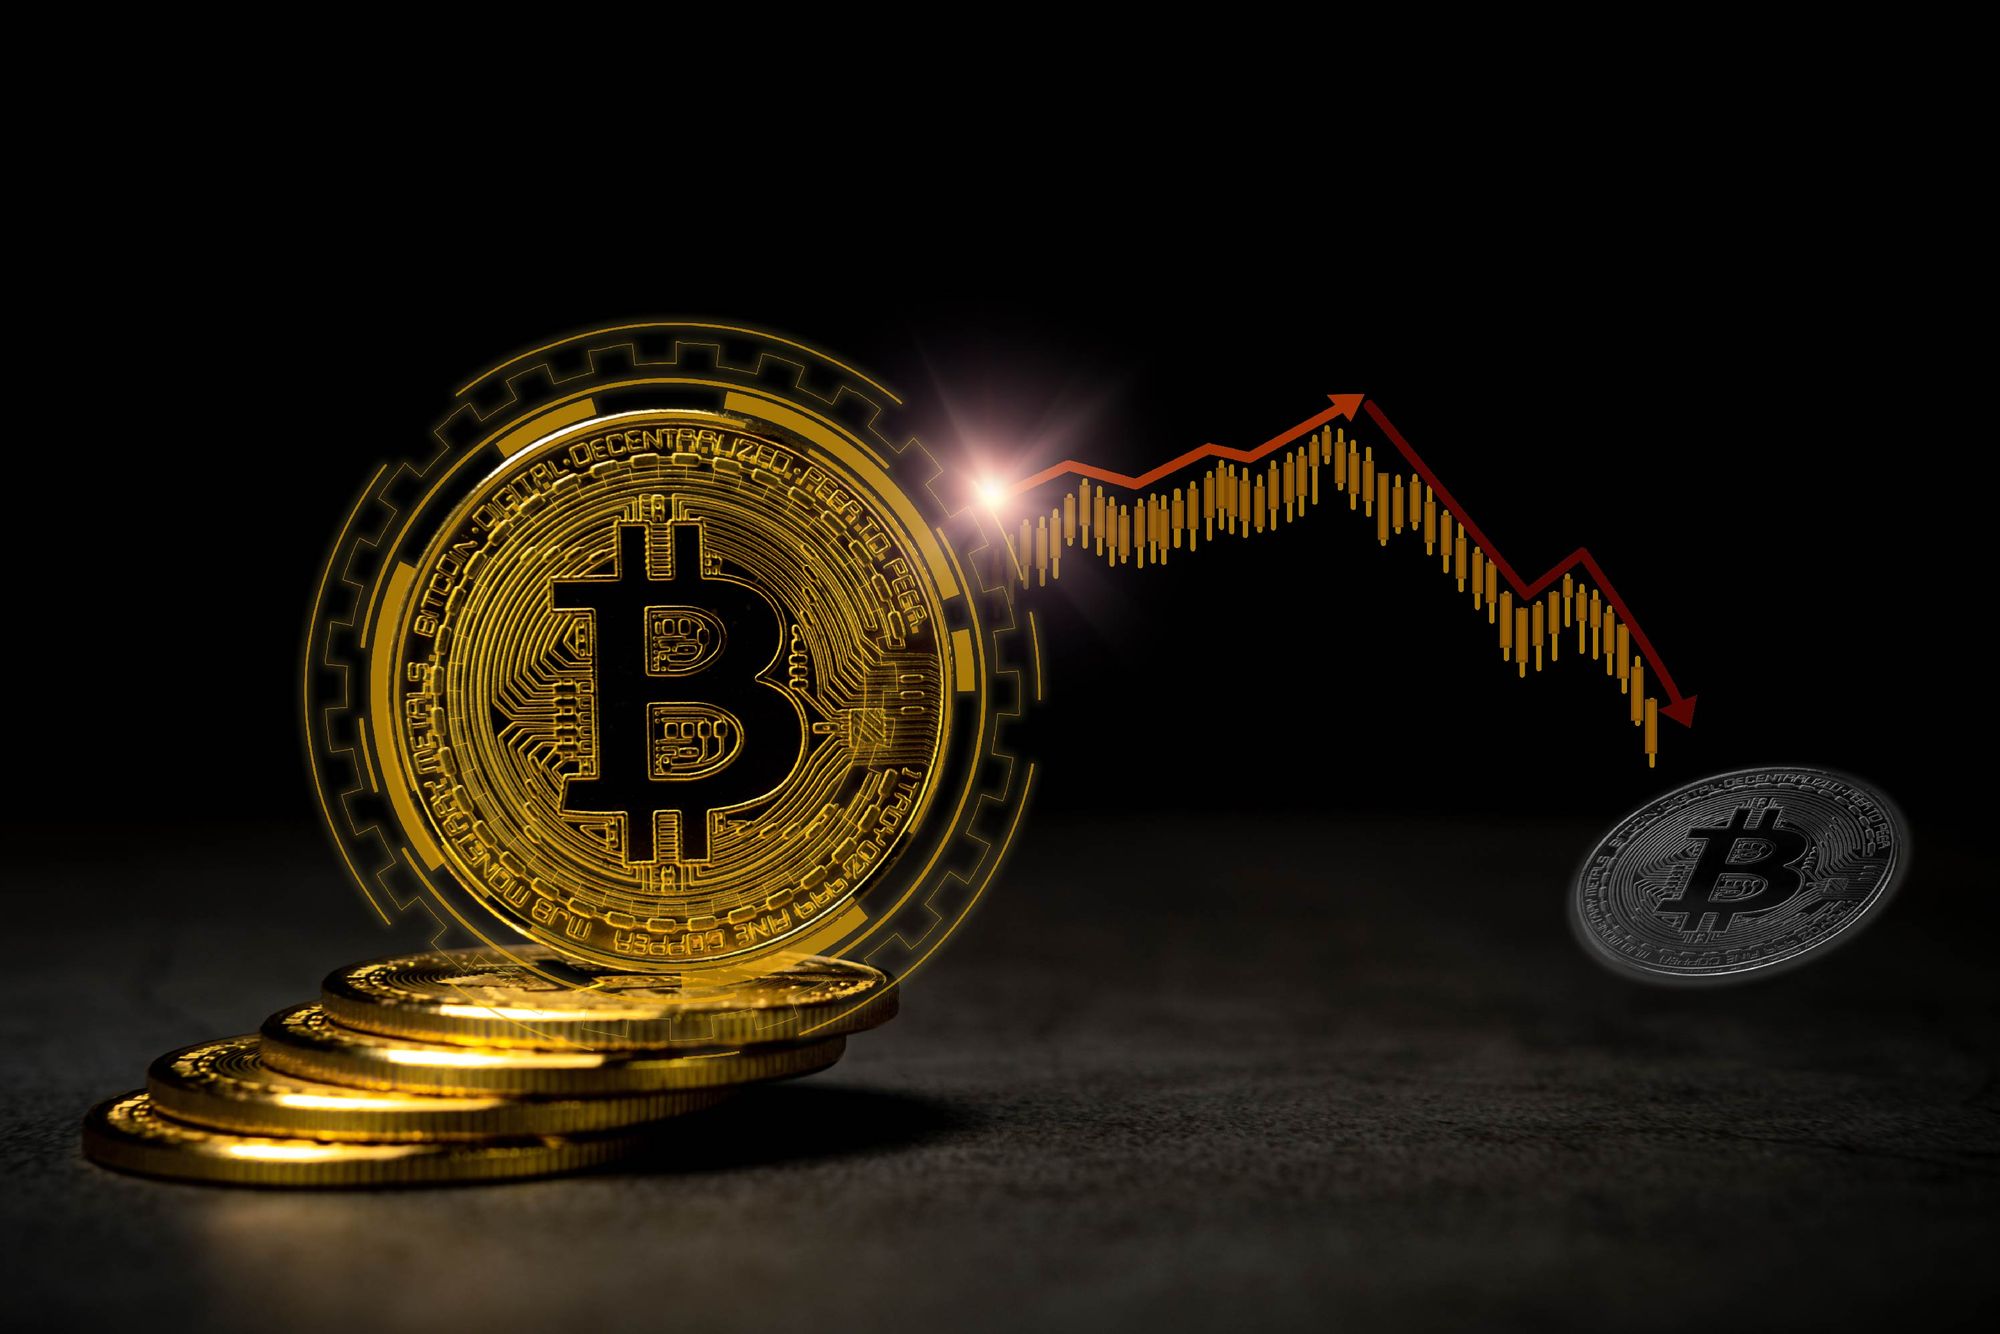 The largest Bitcoin event did not affect the price of BTC